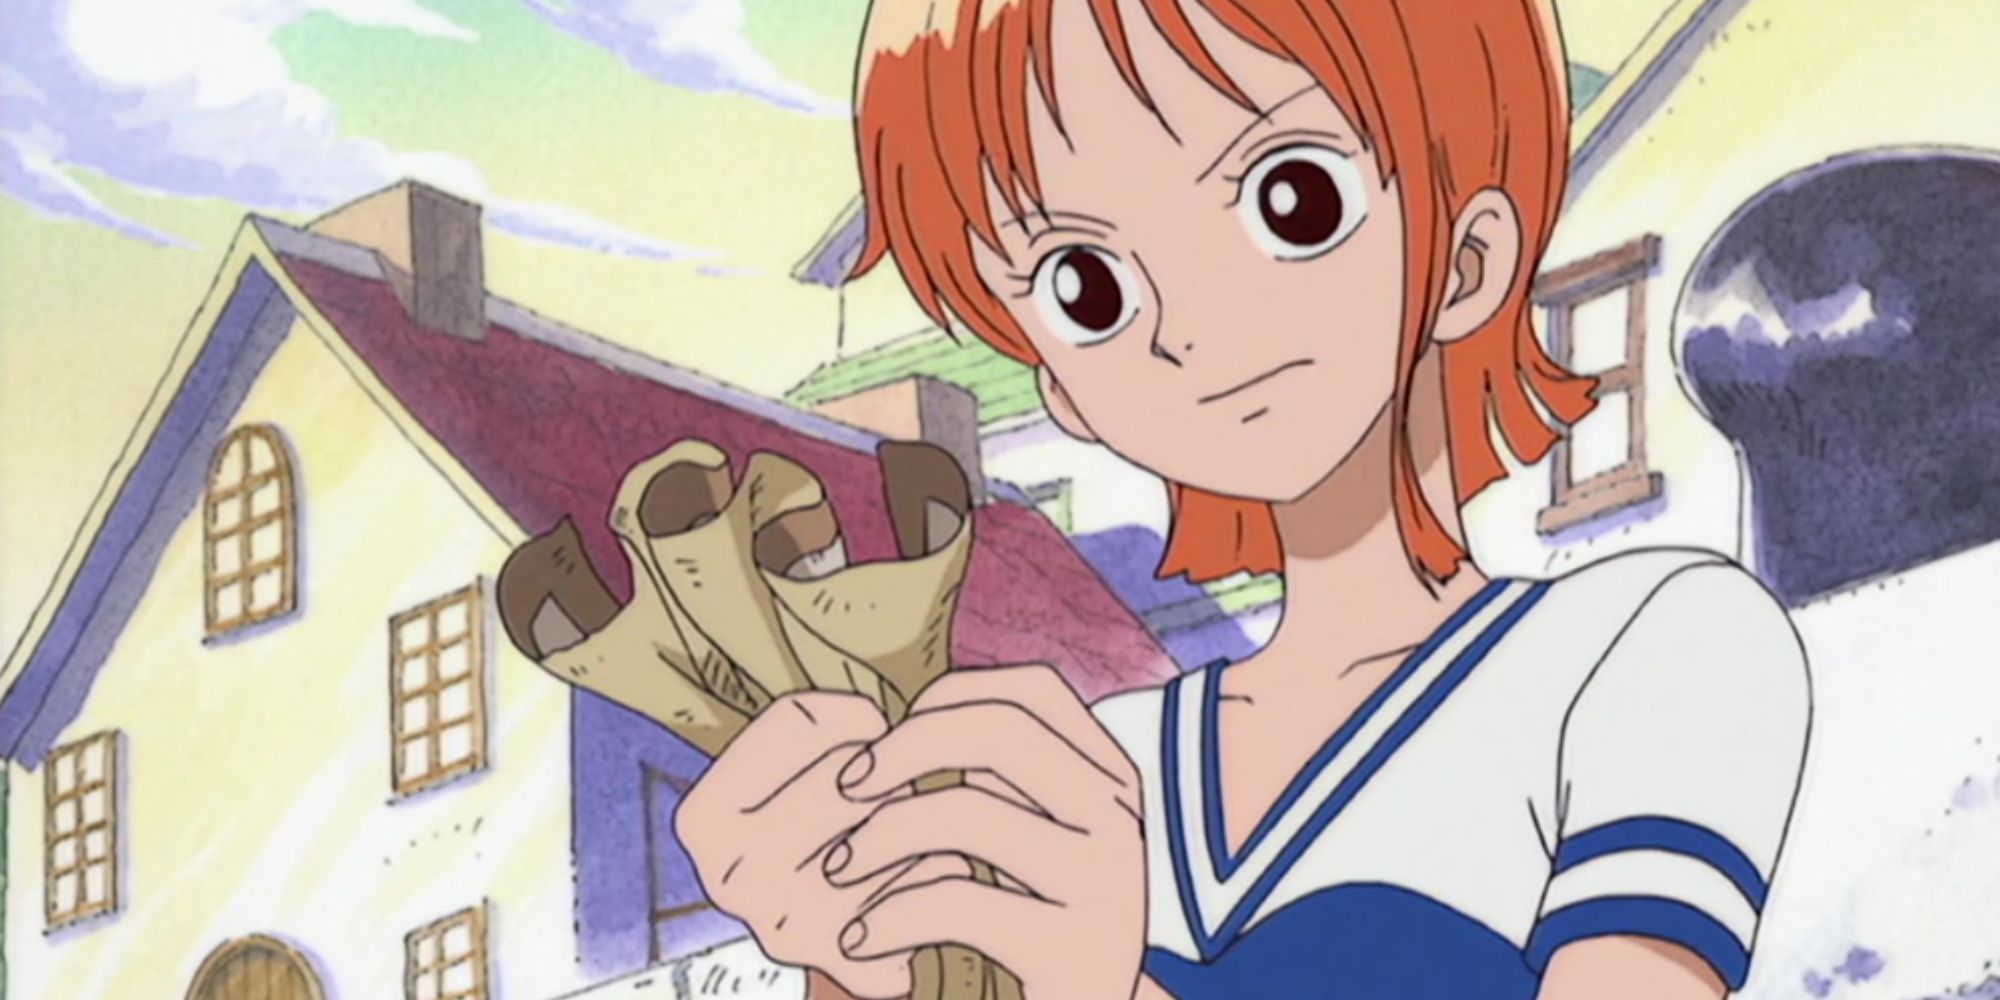 Nami looking at a map during the Orange Town arc in One Piece.